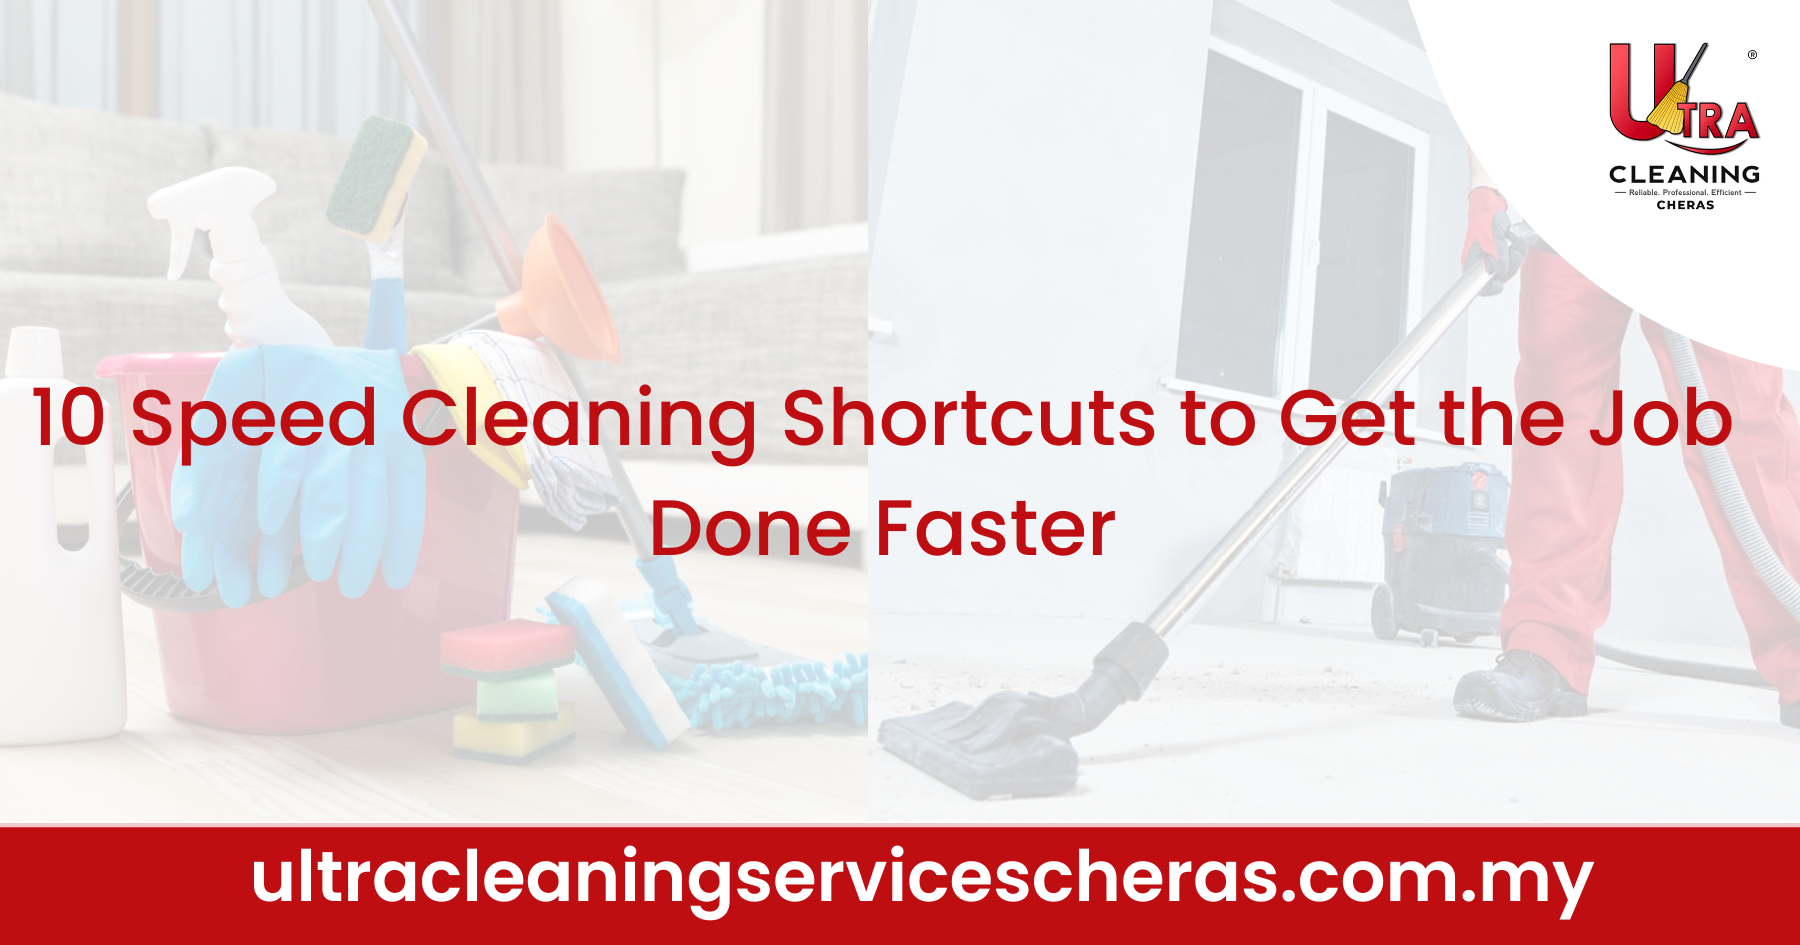 10 Speed Cleaning Shortcuts to Get the Job Done Faster